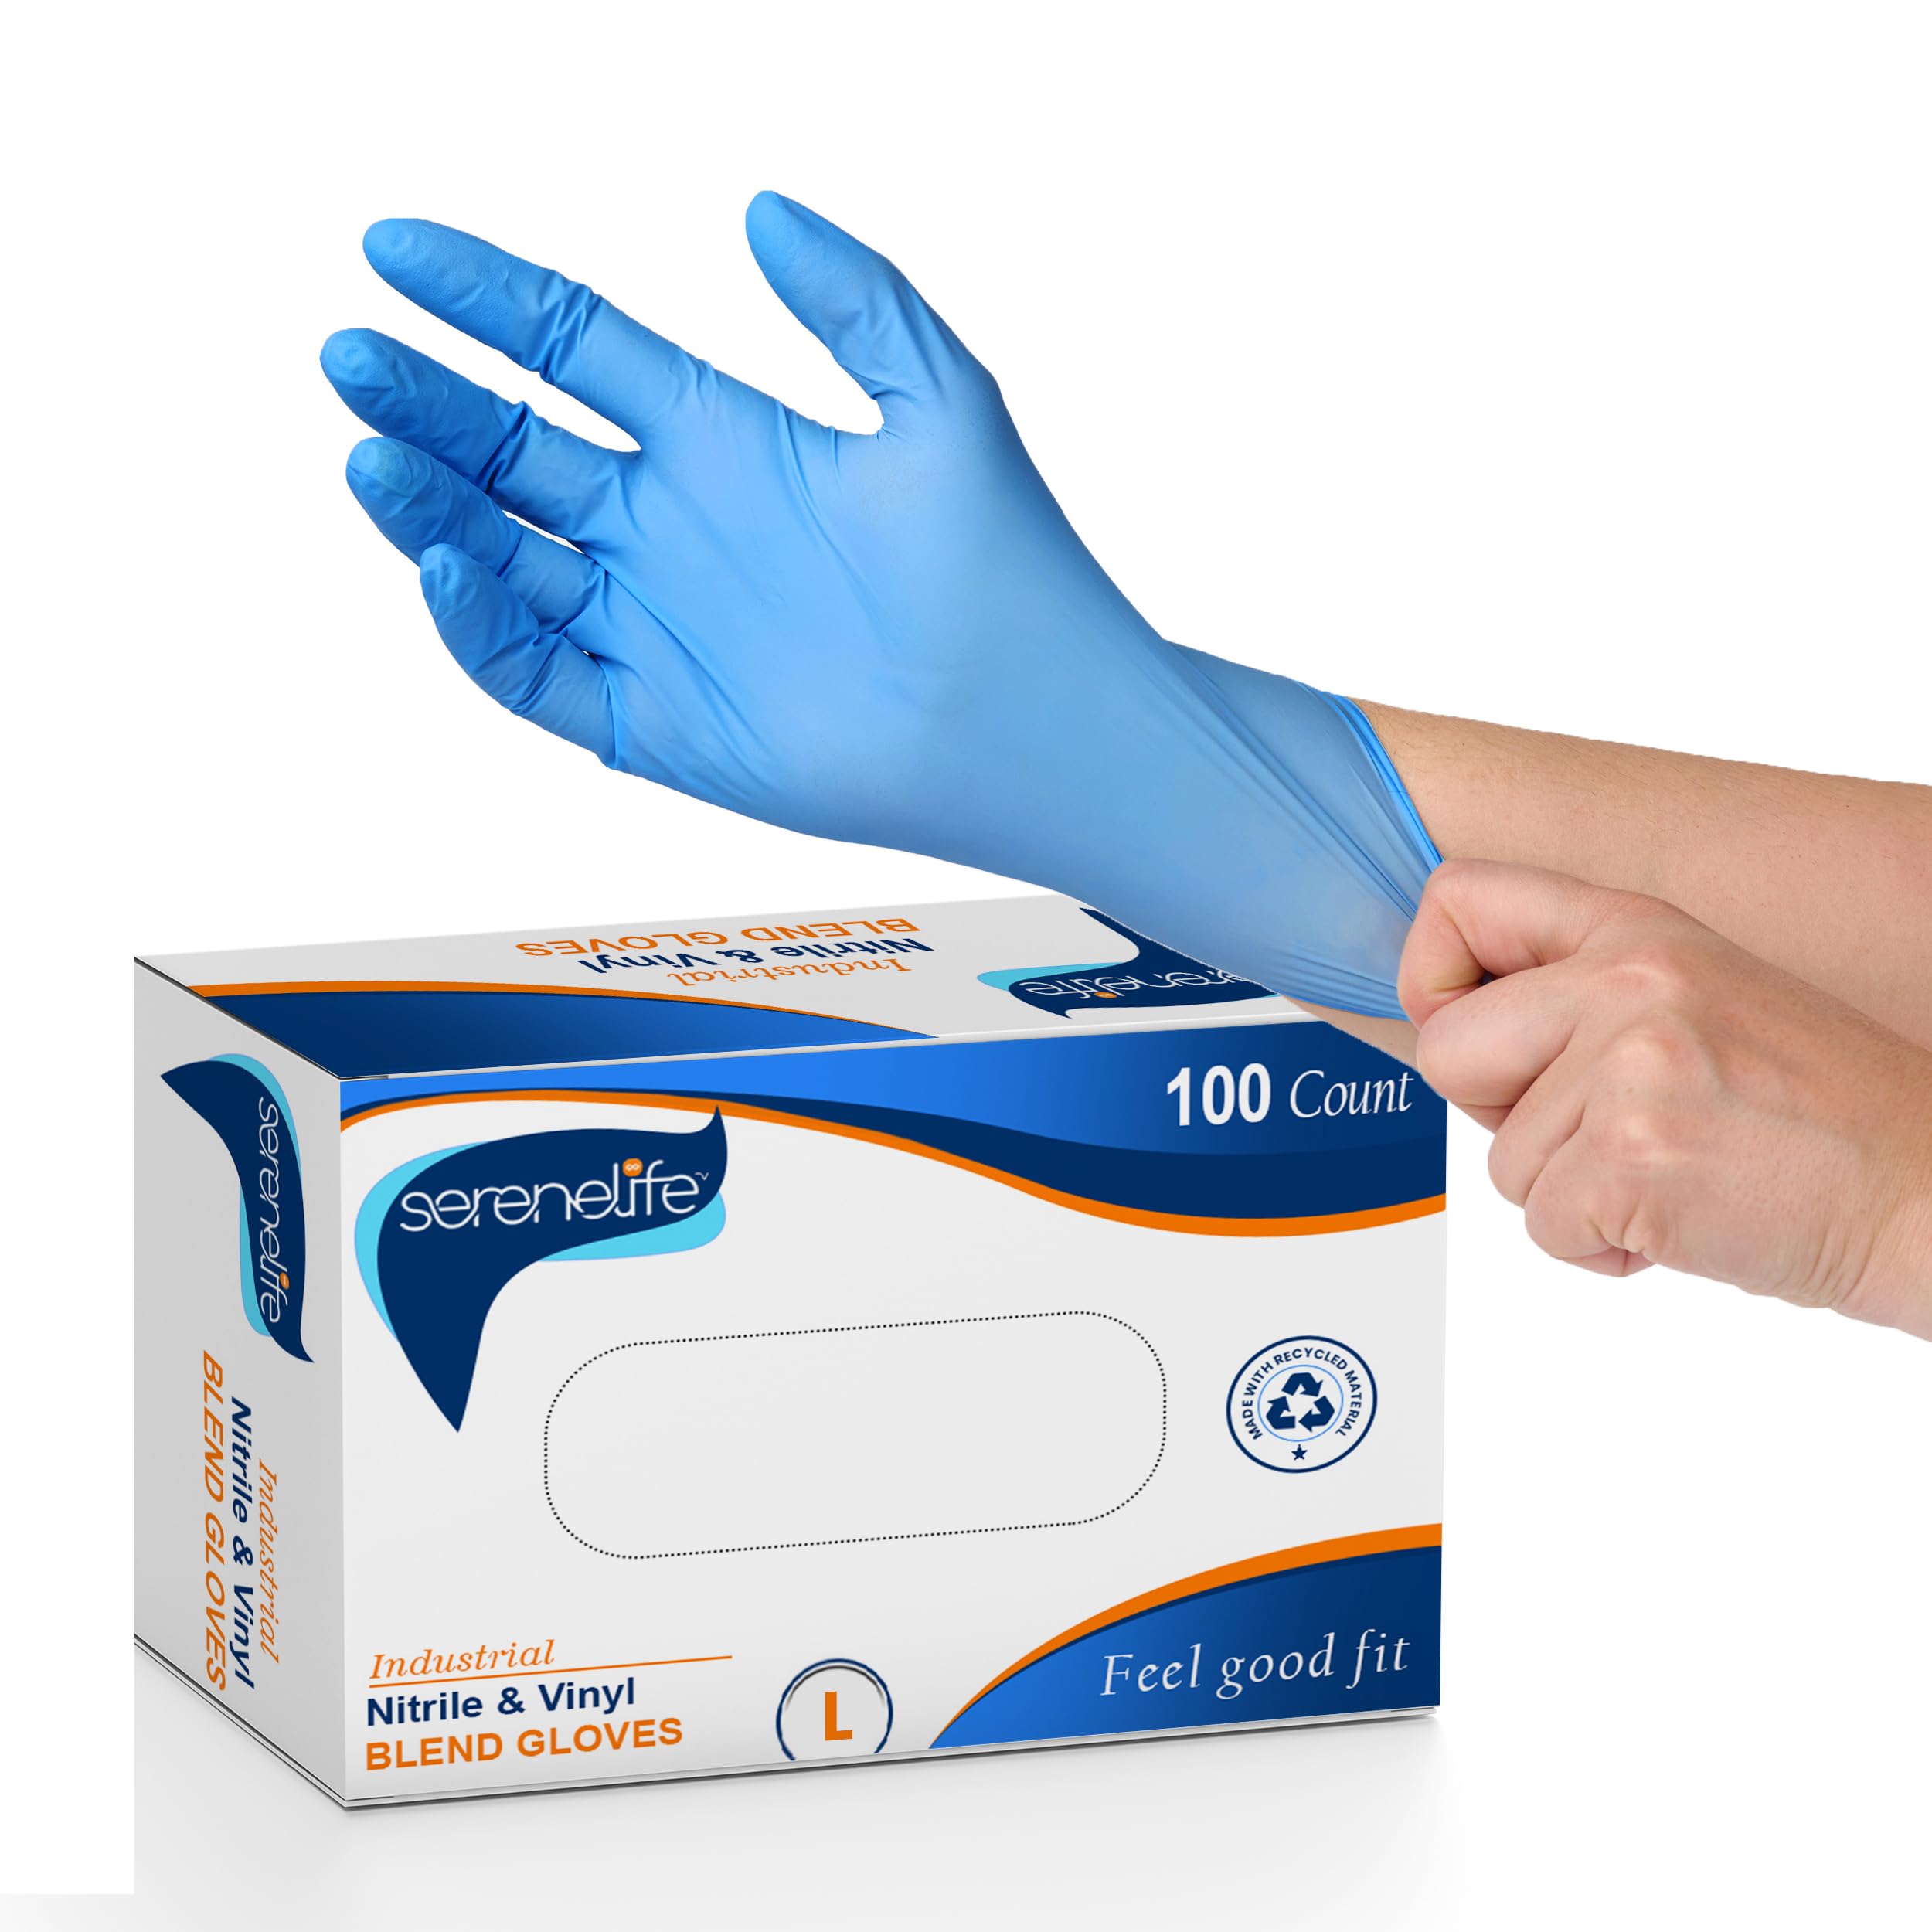 Large Size Nitrile Disposable Latex & Powder Free Gloves - Great for Kitchens, Food Handling & Cleaning Supplies - Soft & Comfortable fit - Vinyl & Nitrile blend - 100 Pack